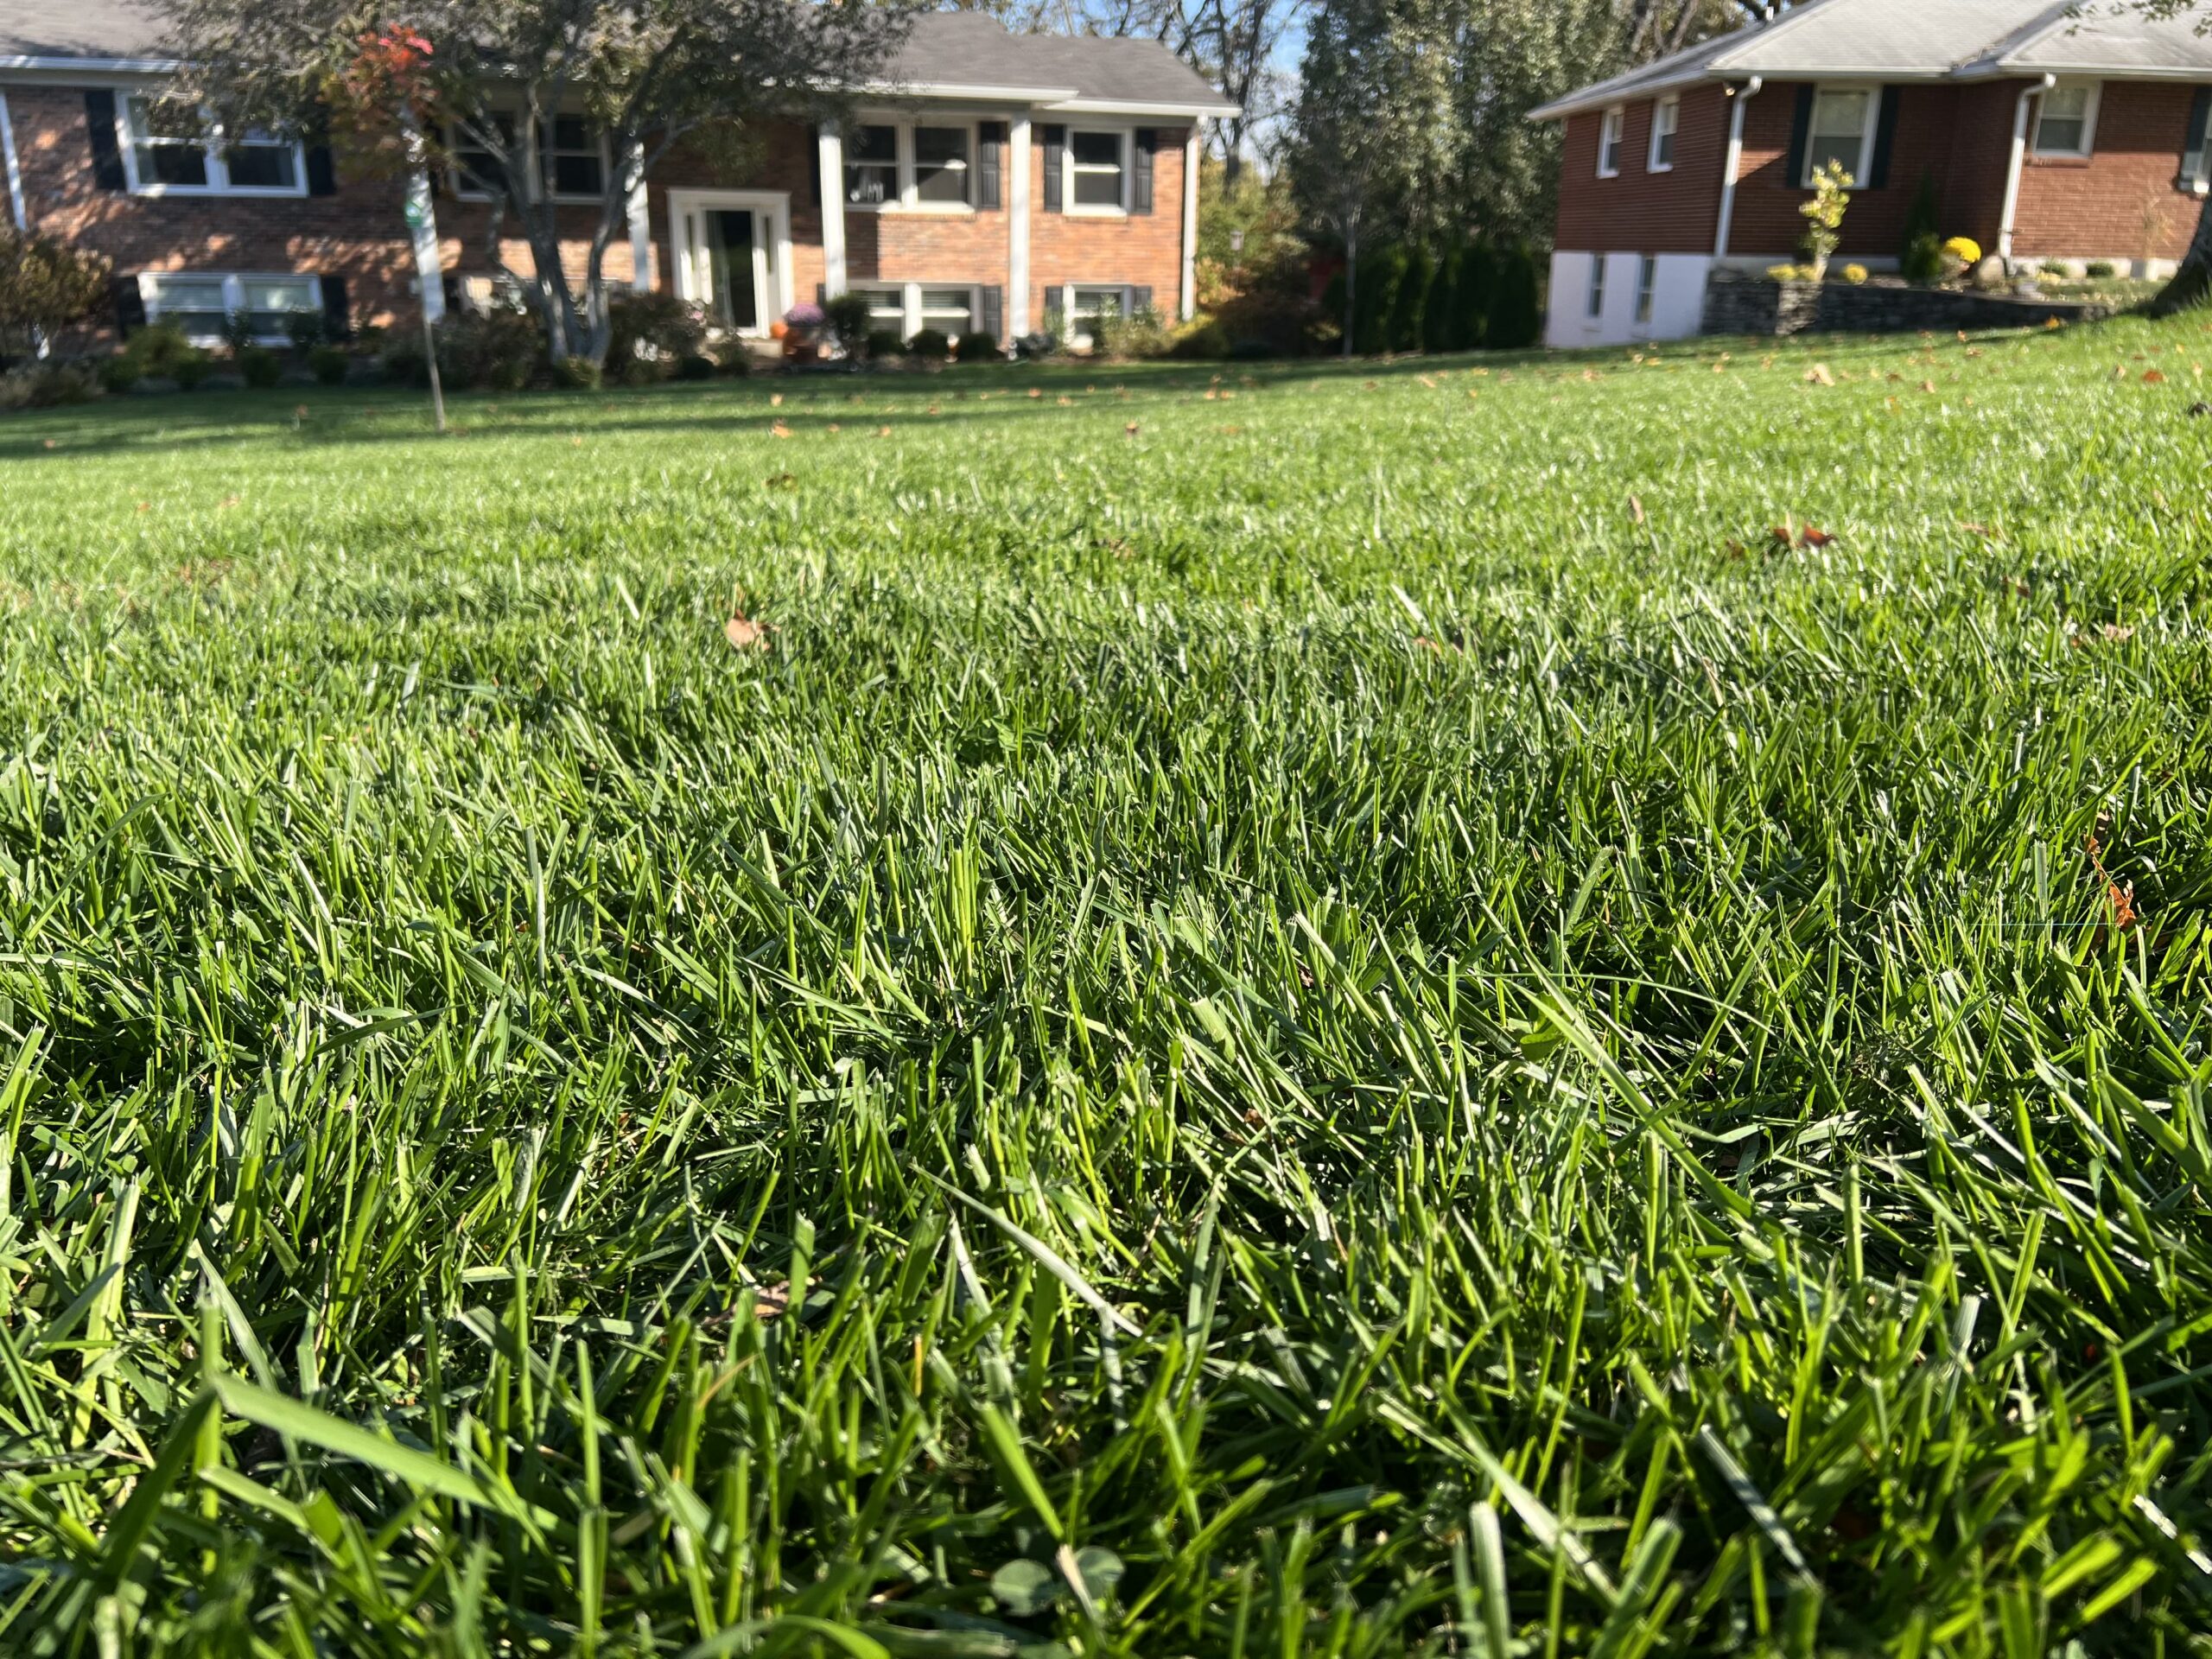 Grass in the fall